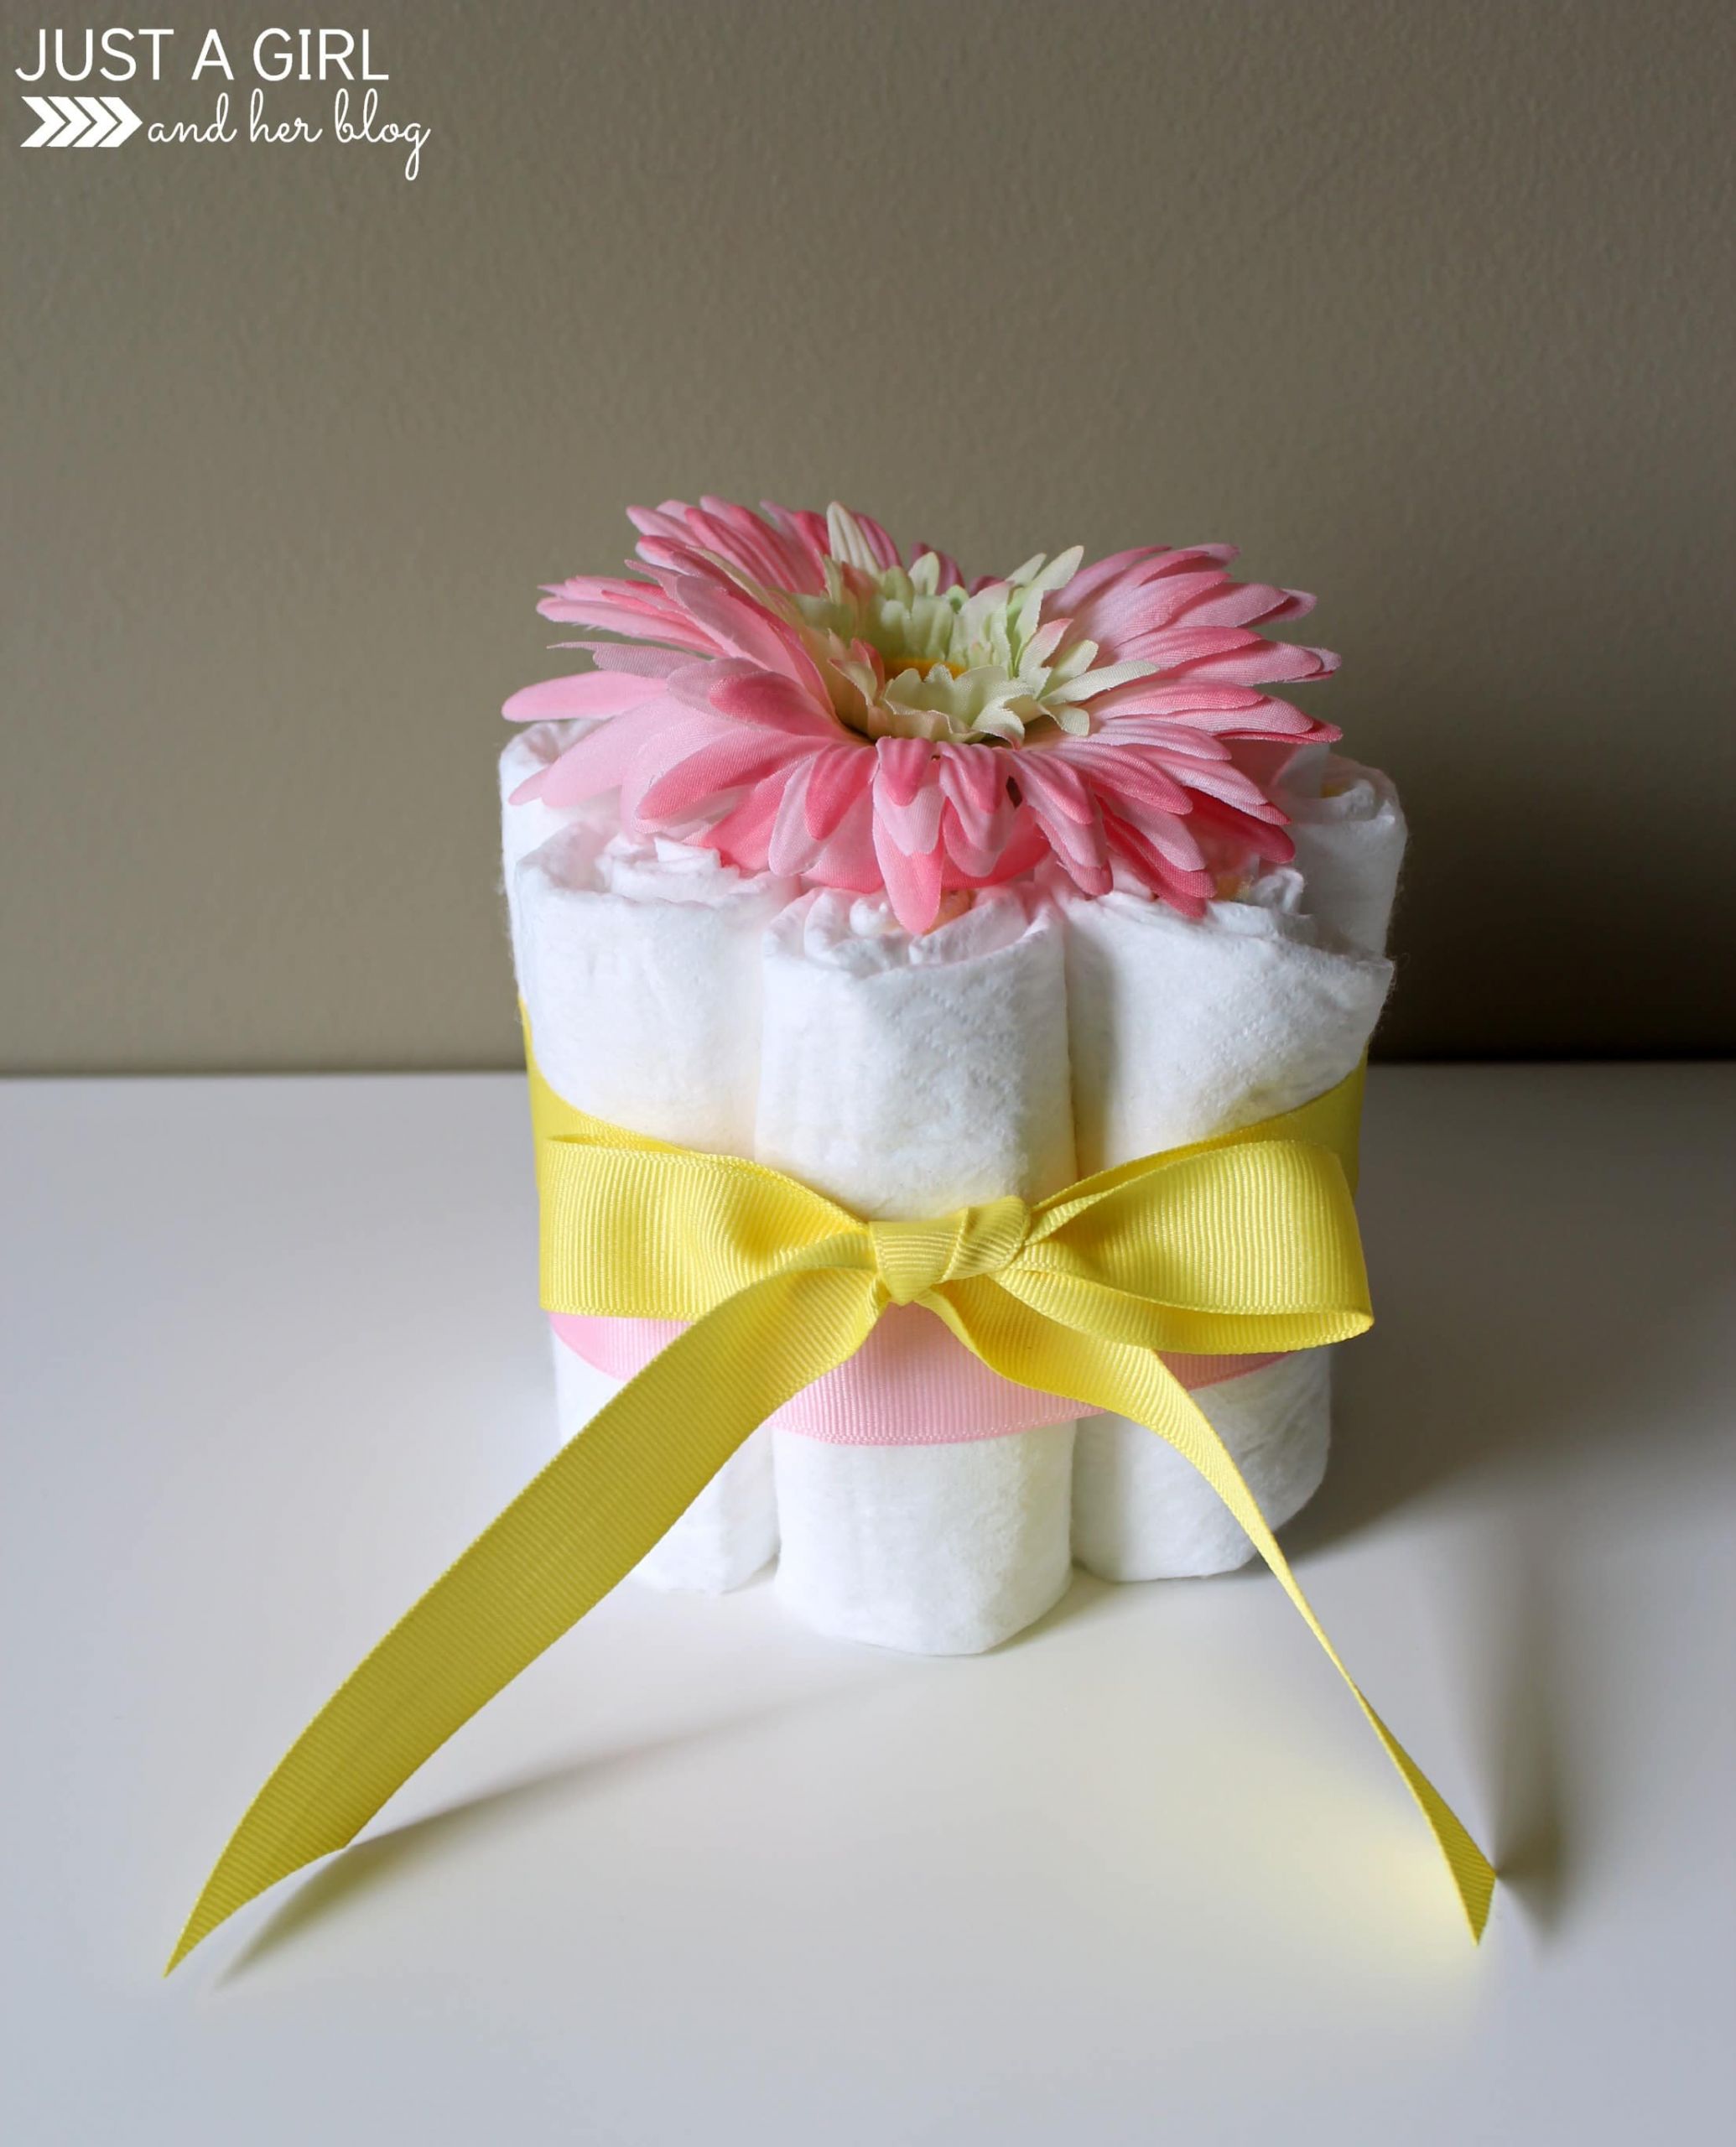 DIY Baby Shower Centerpieces
 Sweet and Simple Baby Shower Centerpieces